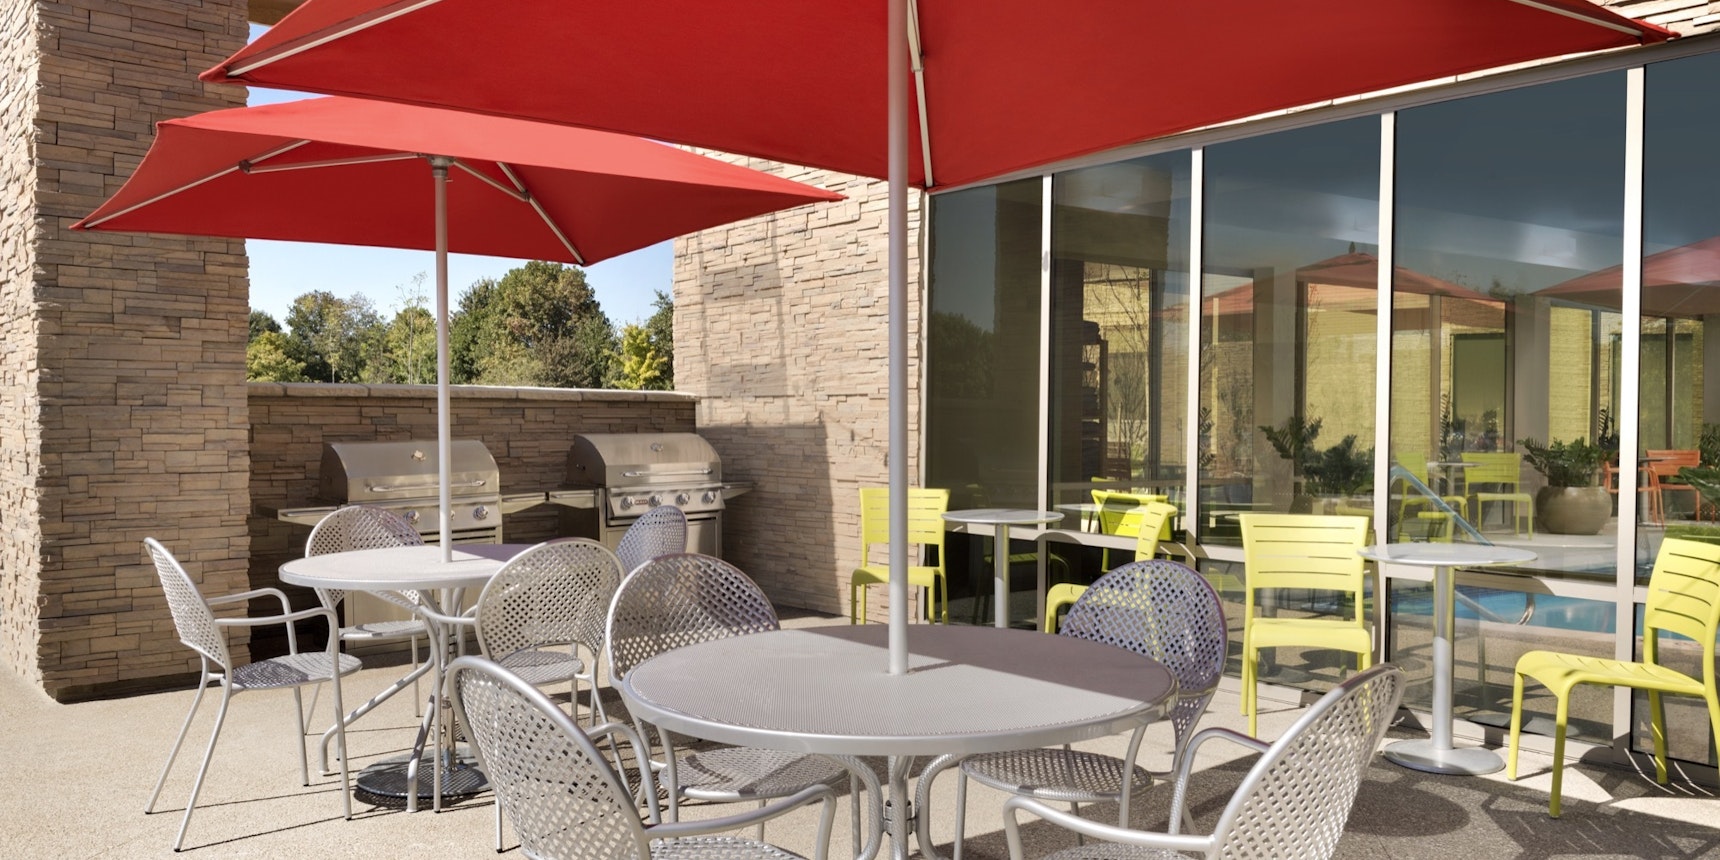 Home2 Suites by Hilton Columbus Dublin Outdoor Patio with Grills